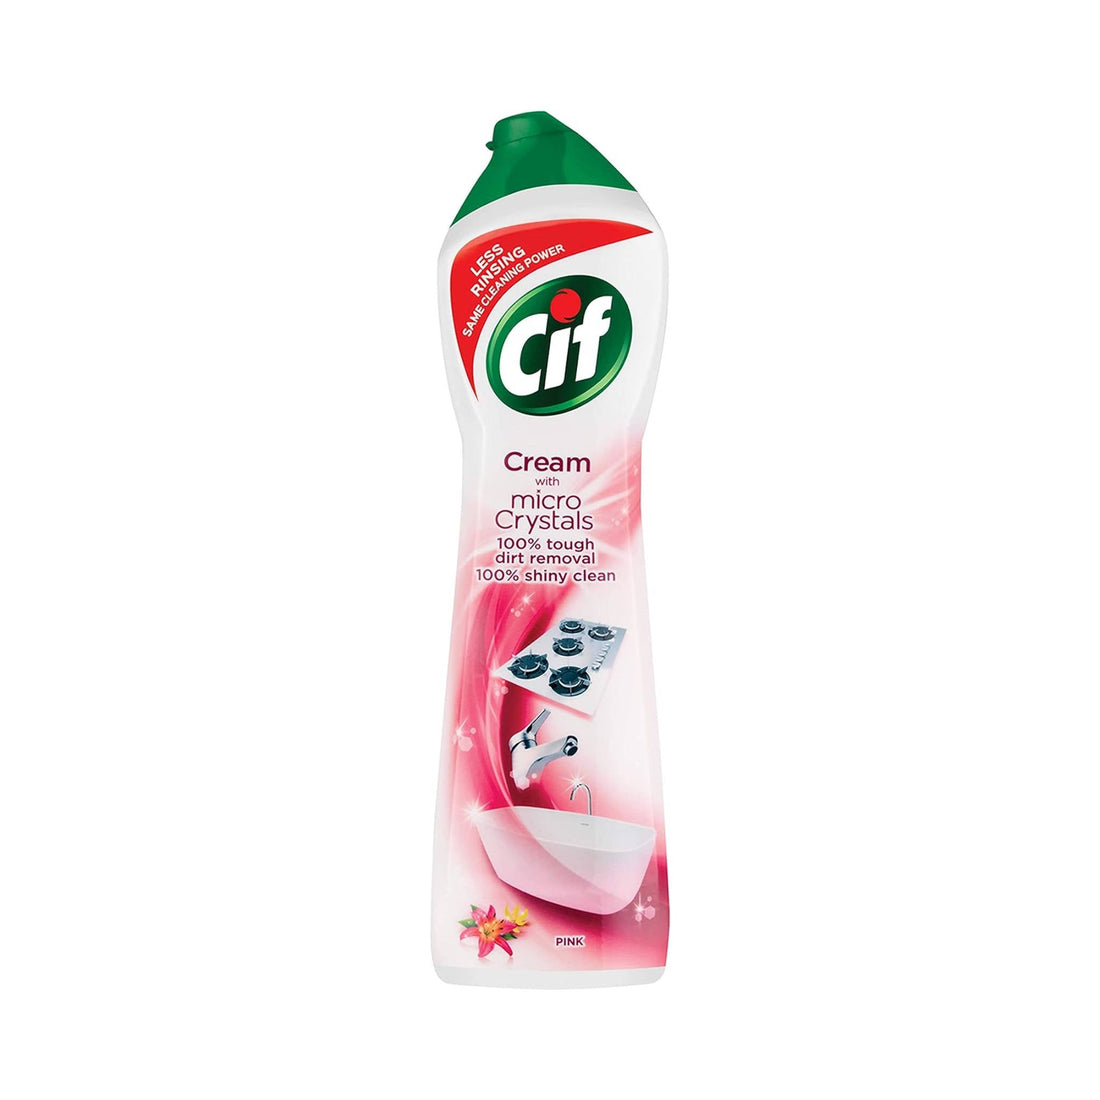 Cif Cream with Micro Crystal Pink Flower | 500ml